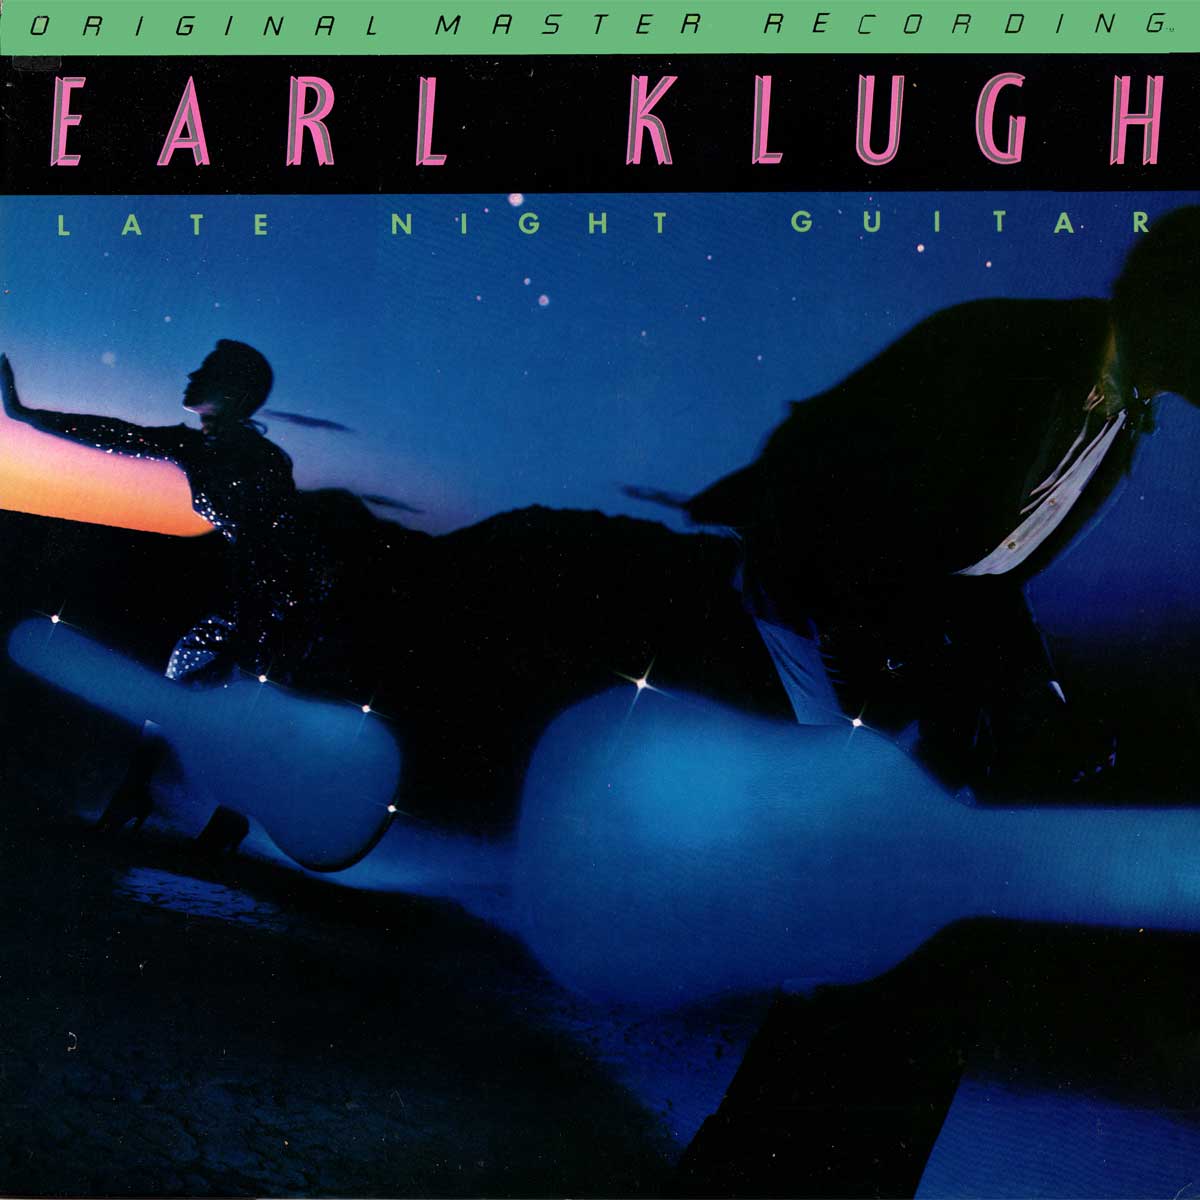 Earl Klugh - Late Night Guitar  - Front cover